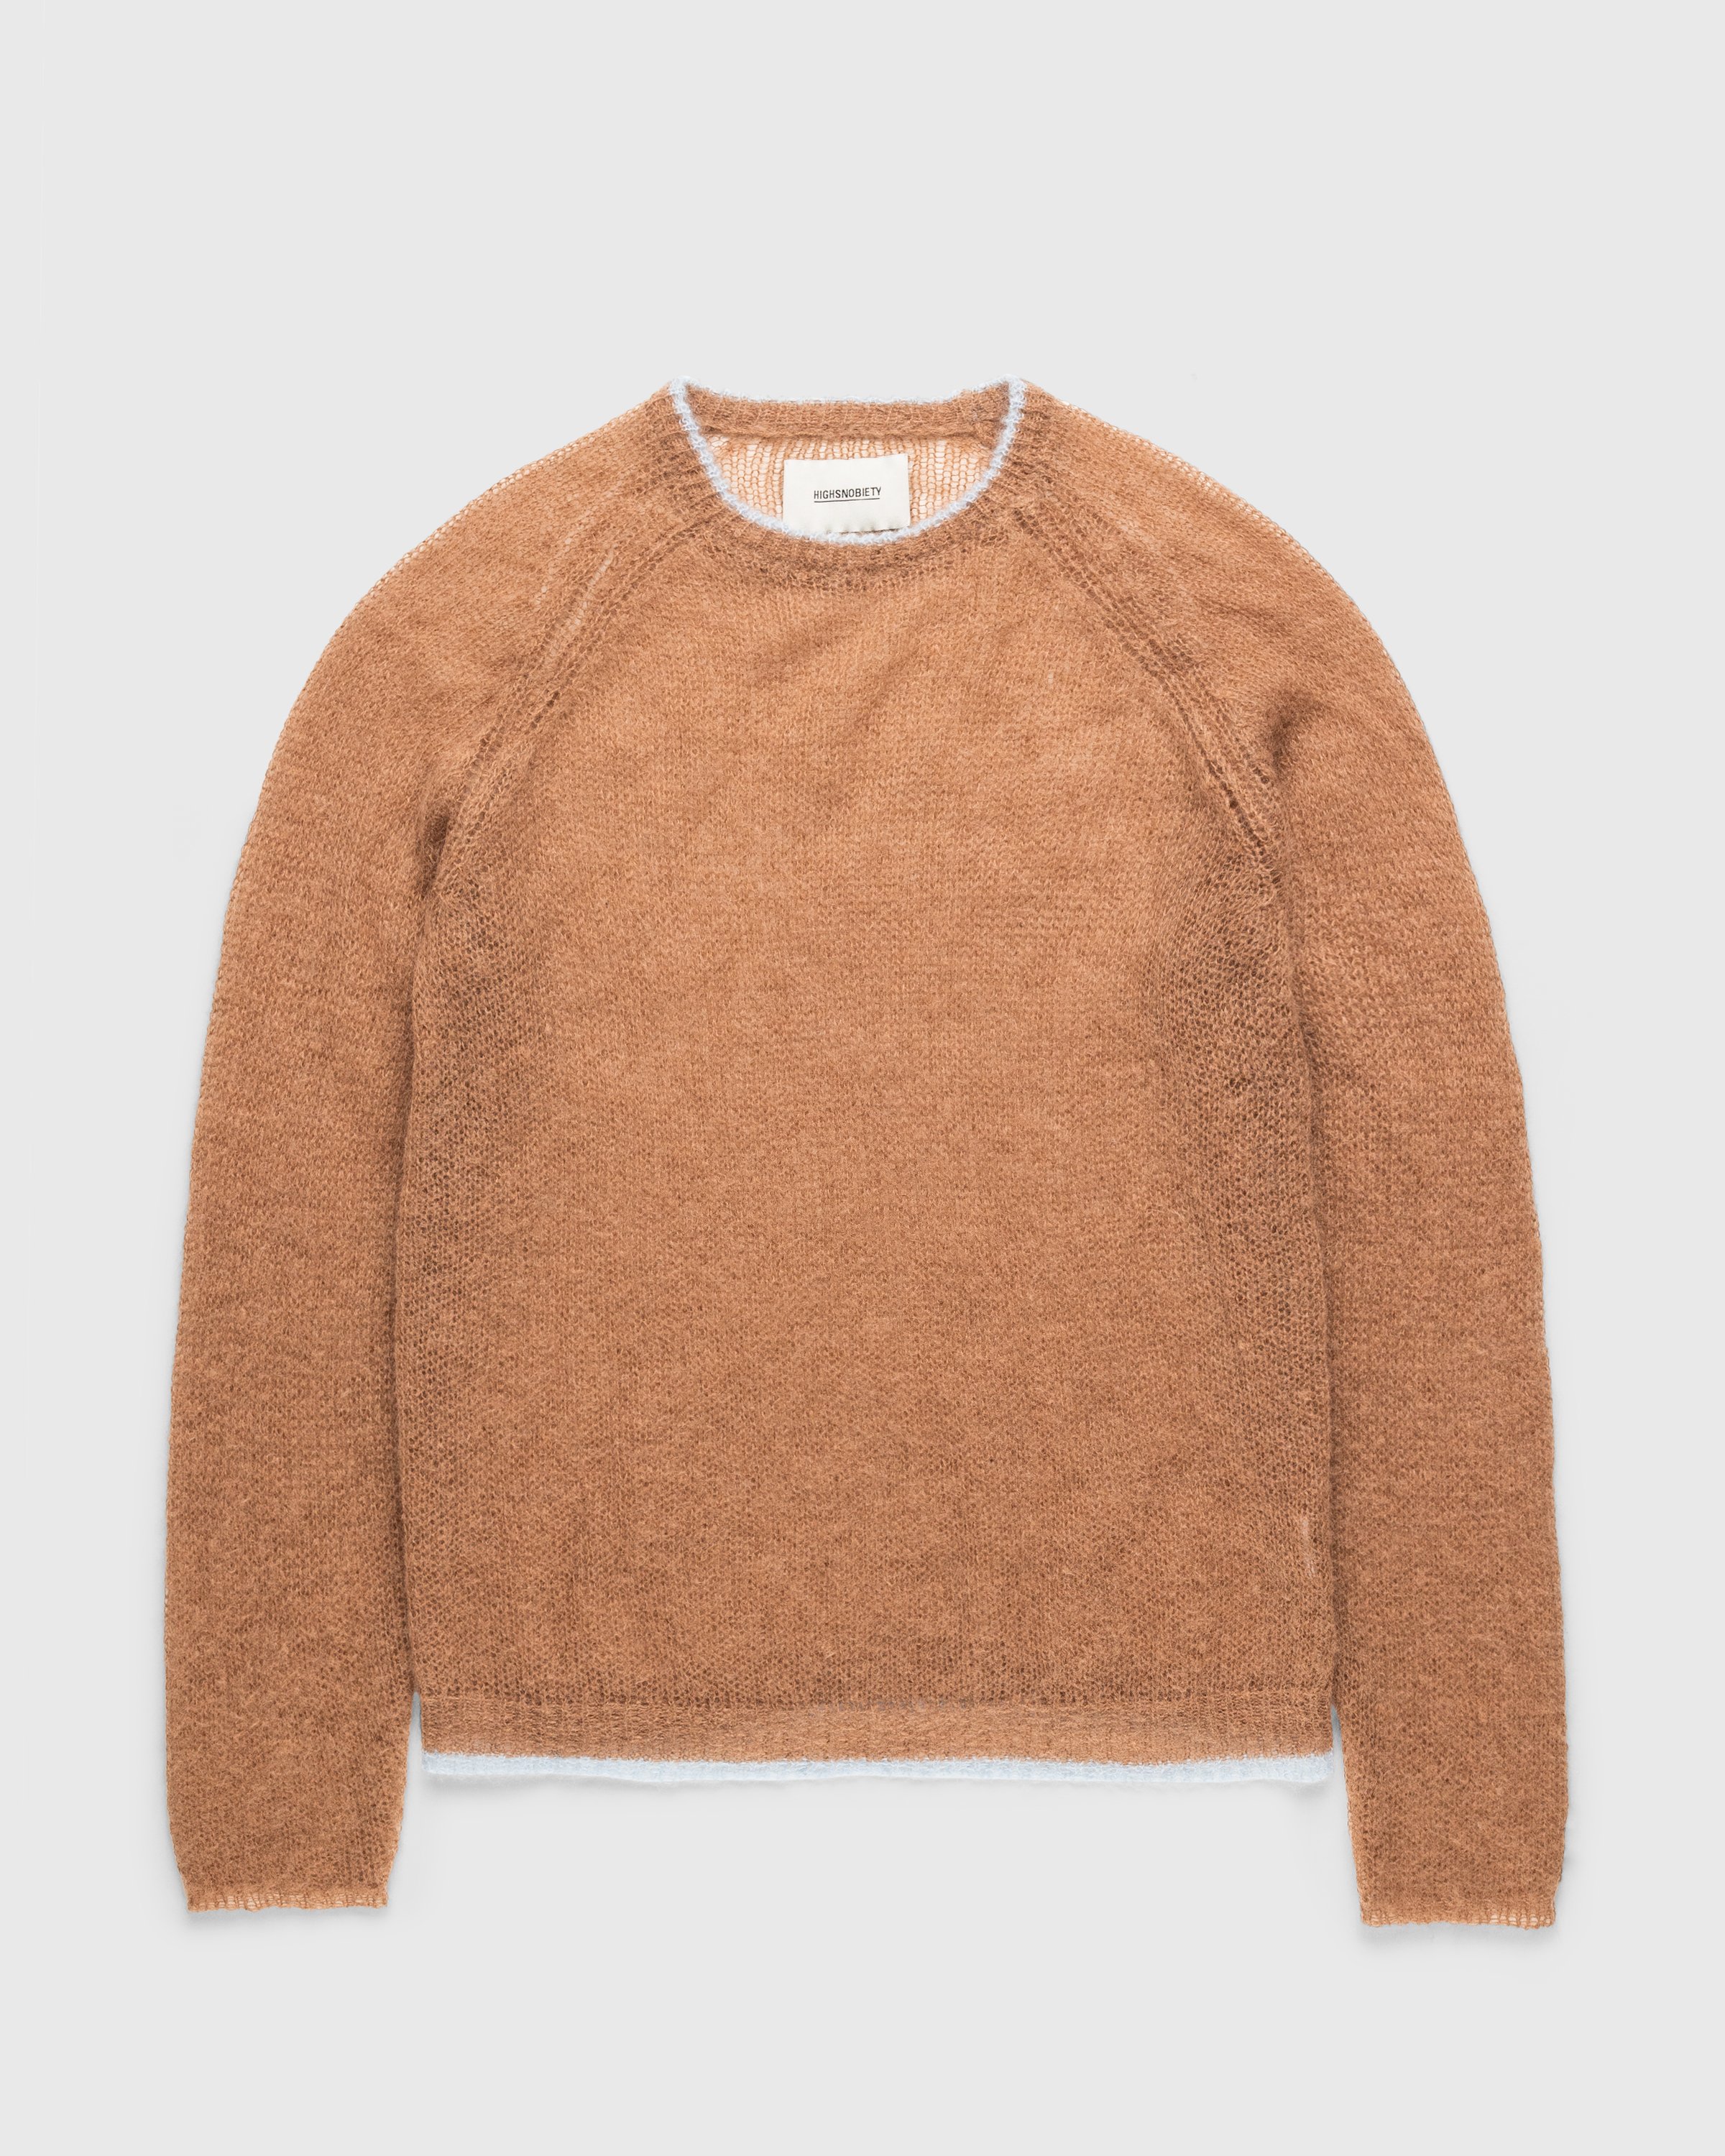 Highsnobiety - Crew Sweater Brown/Light Blue - Clothing - Brown - Image 1